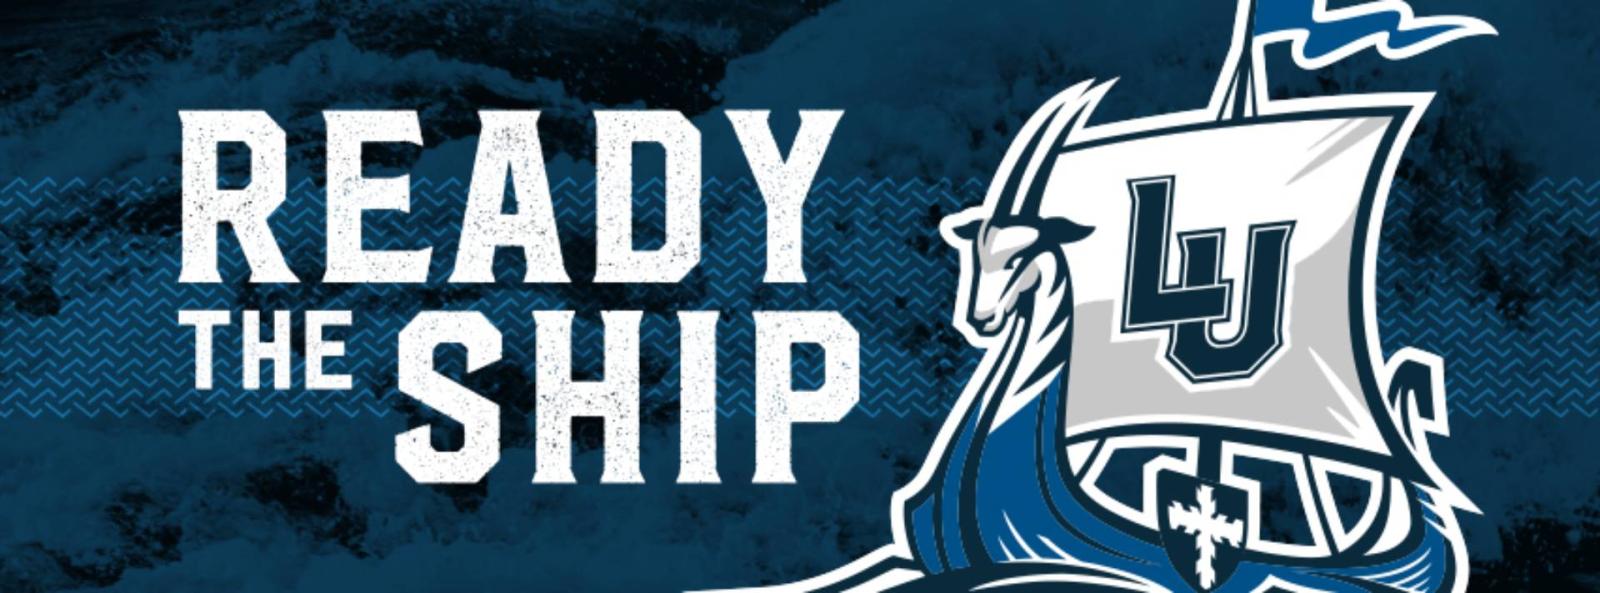 Cover Photo for Facebook with "Ready the Ship" to the left of the banner and the LU Viking logo on the right side of the banner.